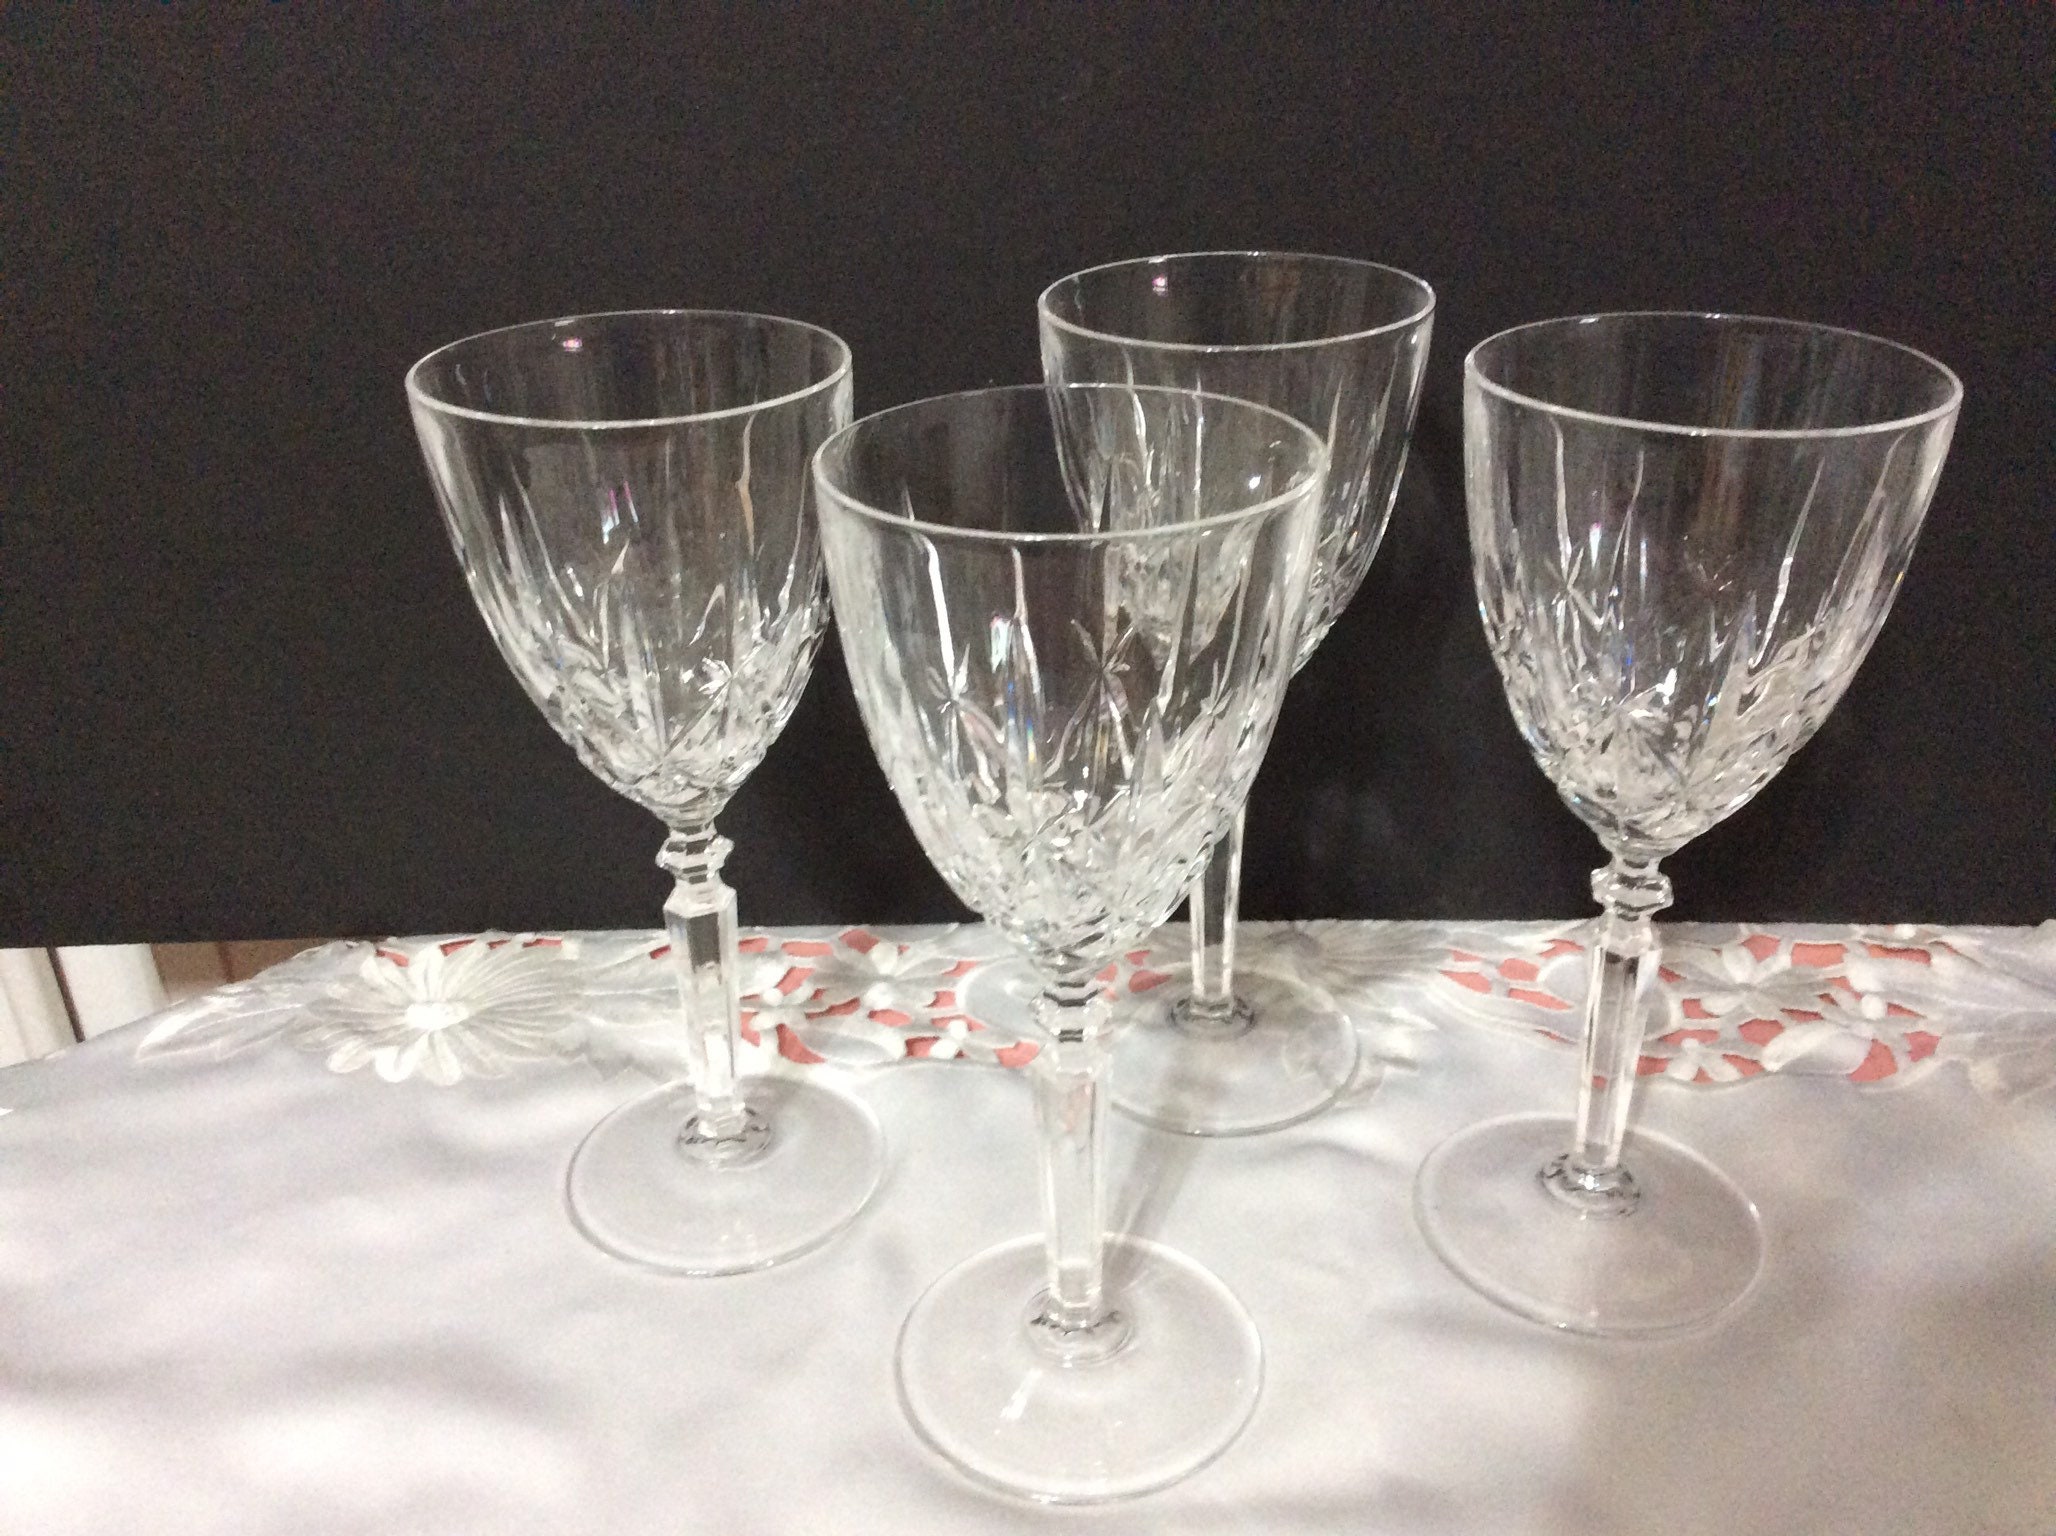 Set of 4 Modern Laser Cut Rim 24 Oz Wine Glasses Made of Crystal With  Seamless Joints (Short Stem) - Stephanie Imports